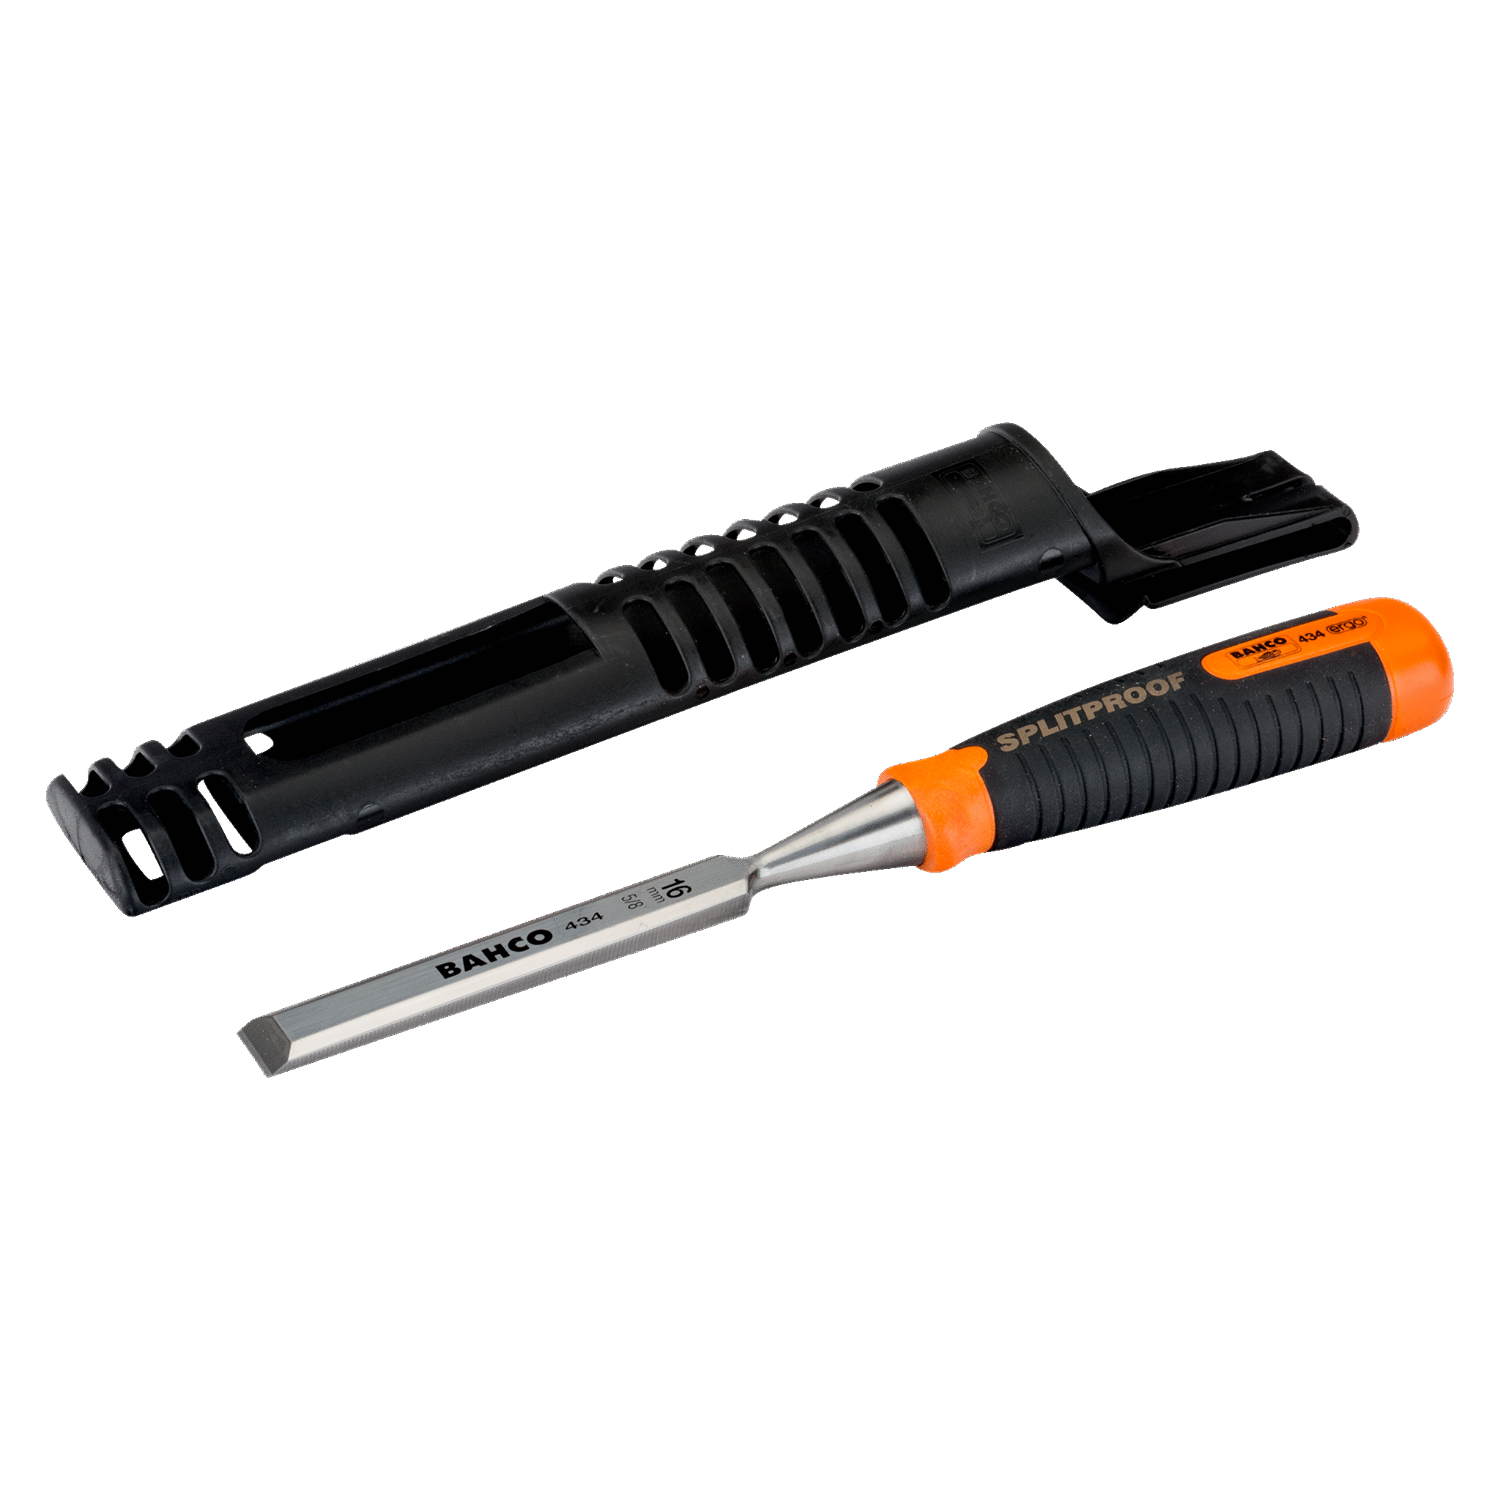 BAHCO 434 ERGO Splitproof Woodworking Chisel (BAHCO Tools) - Premium Woodworking Chisel from BAHCO - Shop now at Yew Aik.